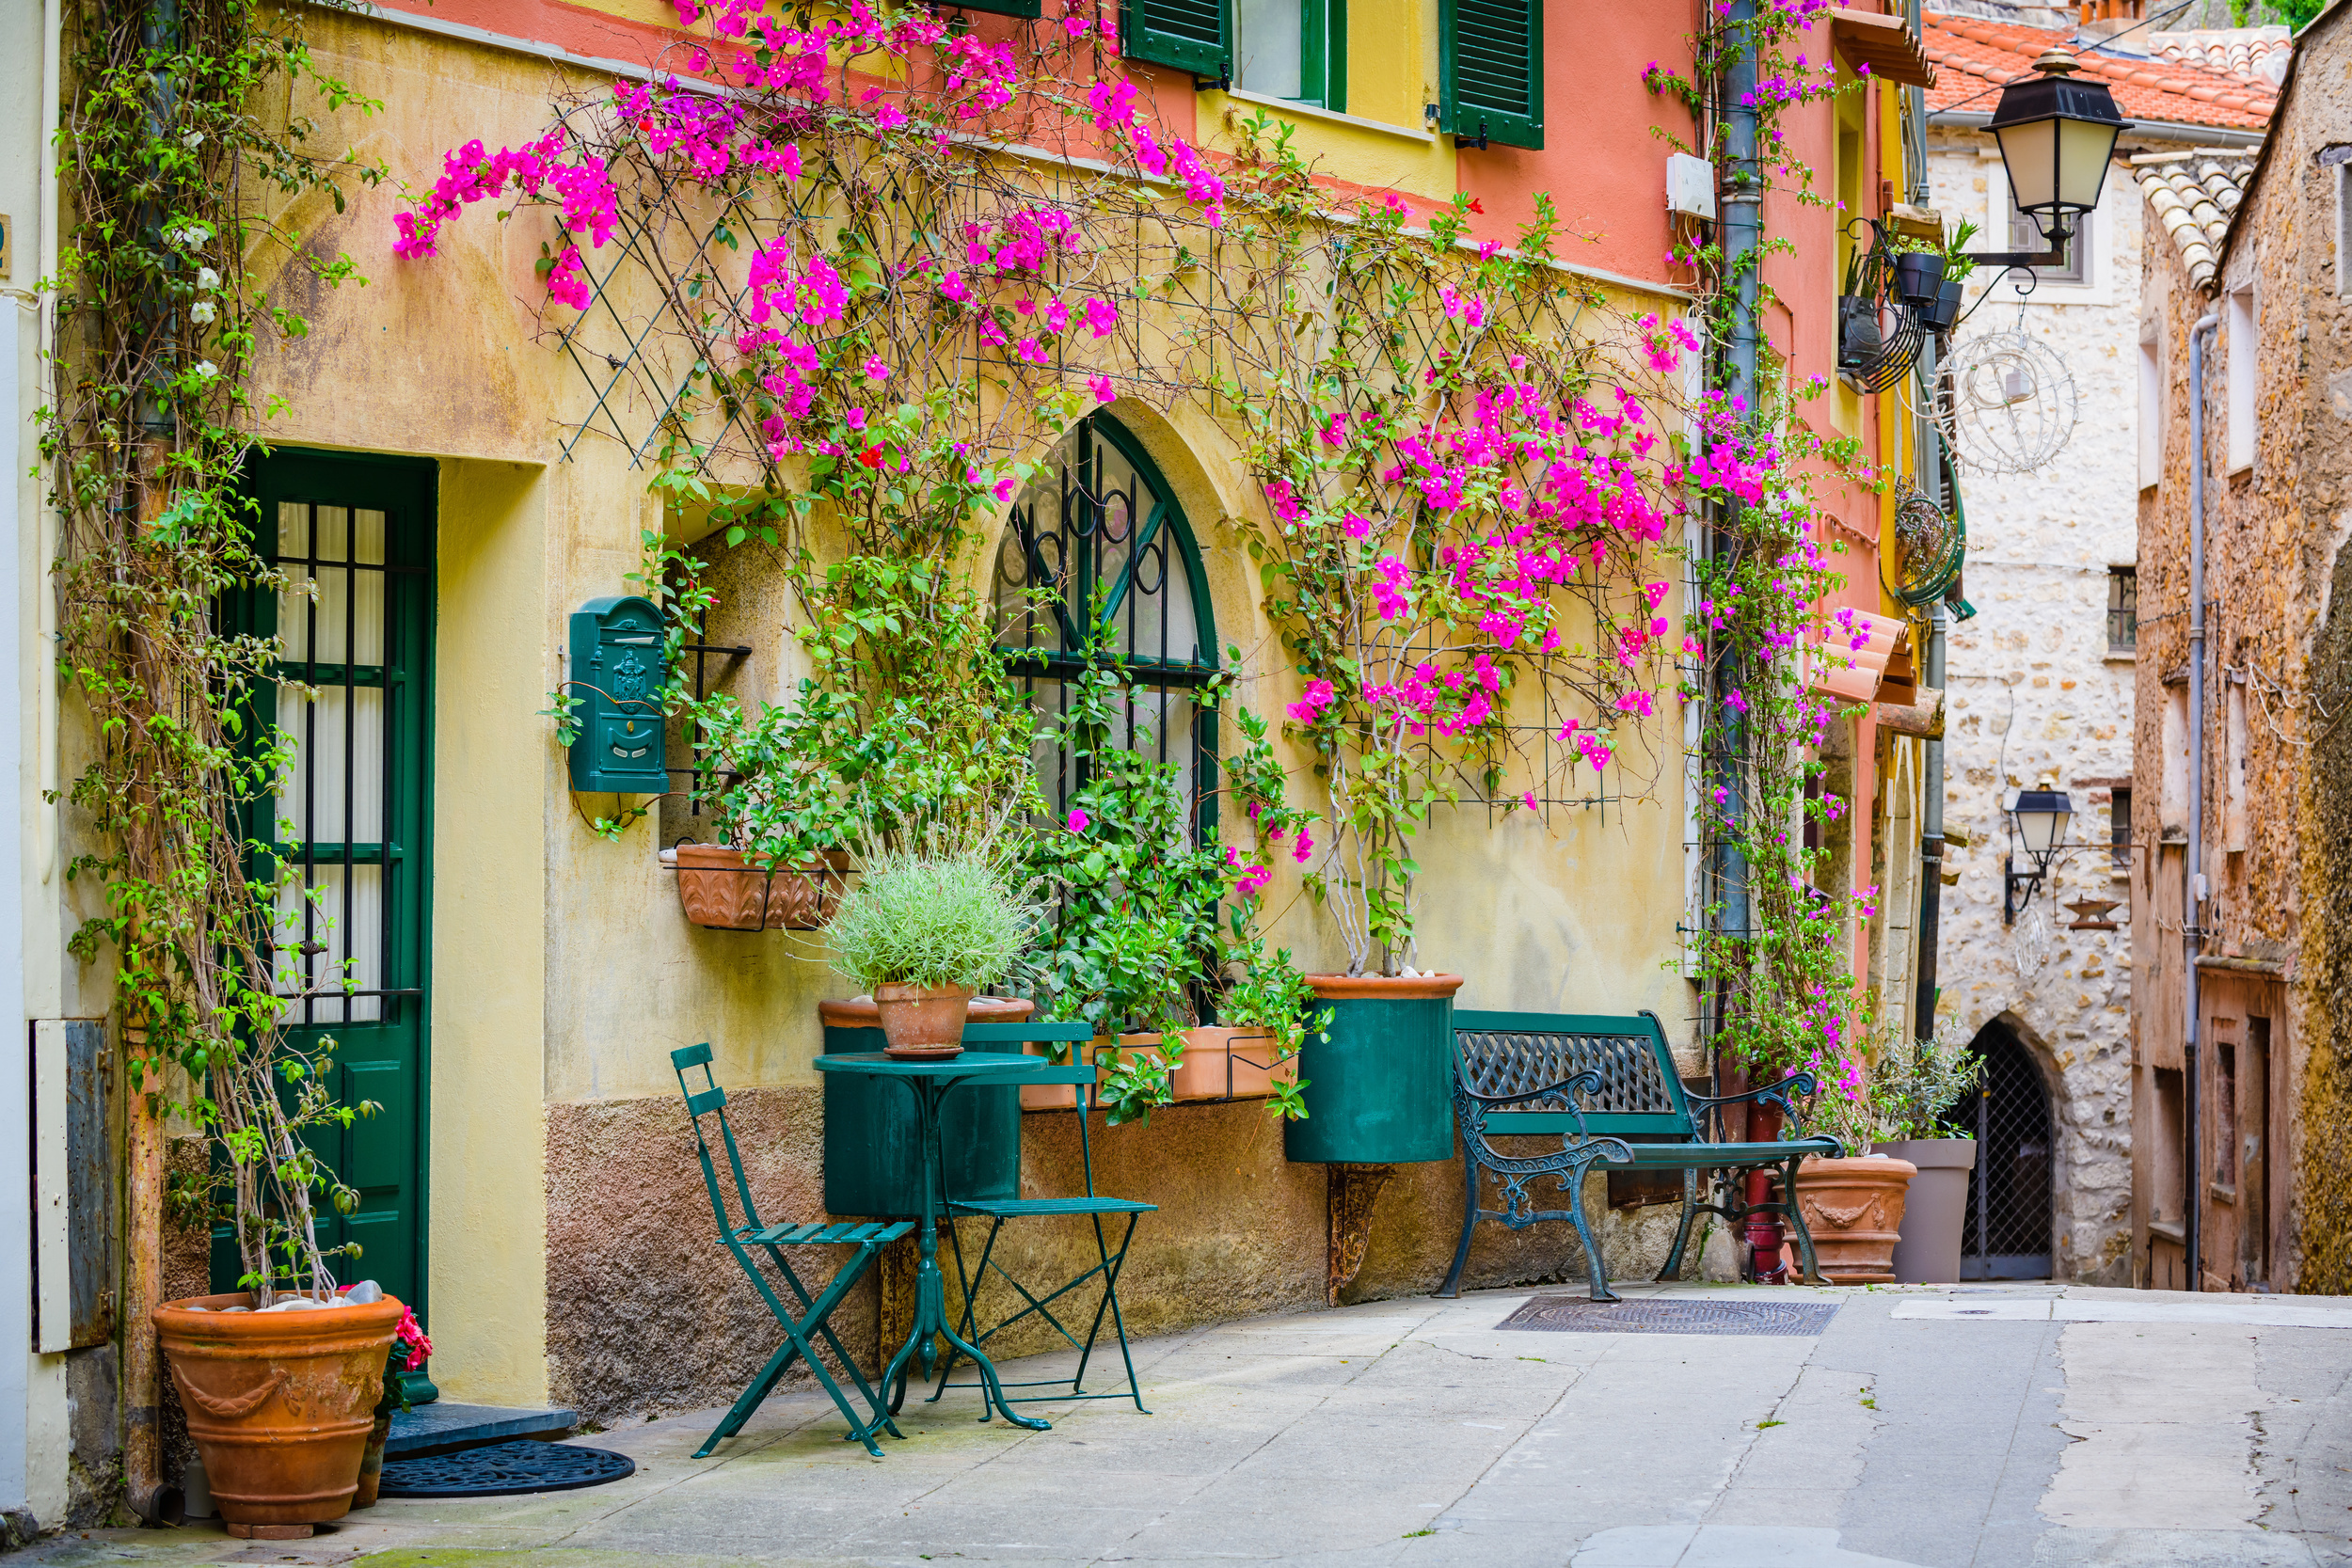 <p>Provence might be best known for lavender in the summer. However, every year, numerous Villages Fleuris (floral villages) erupt in color, thanks to local efforts to beautify the towns come spring. </p><p>You may also like: <a href='https://www.yardbarker.com/lifestyle/articles/20_basic_cooking_tips_thatll_instantly_improve_your_food/s1__40188069'>20 basic cooking tips that'll instantly improve your food</a></p>